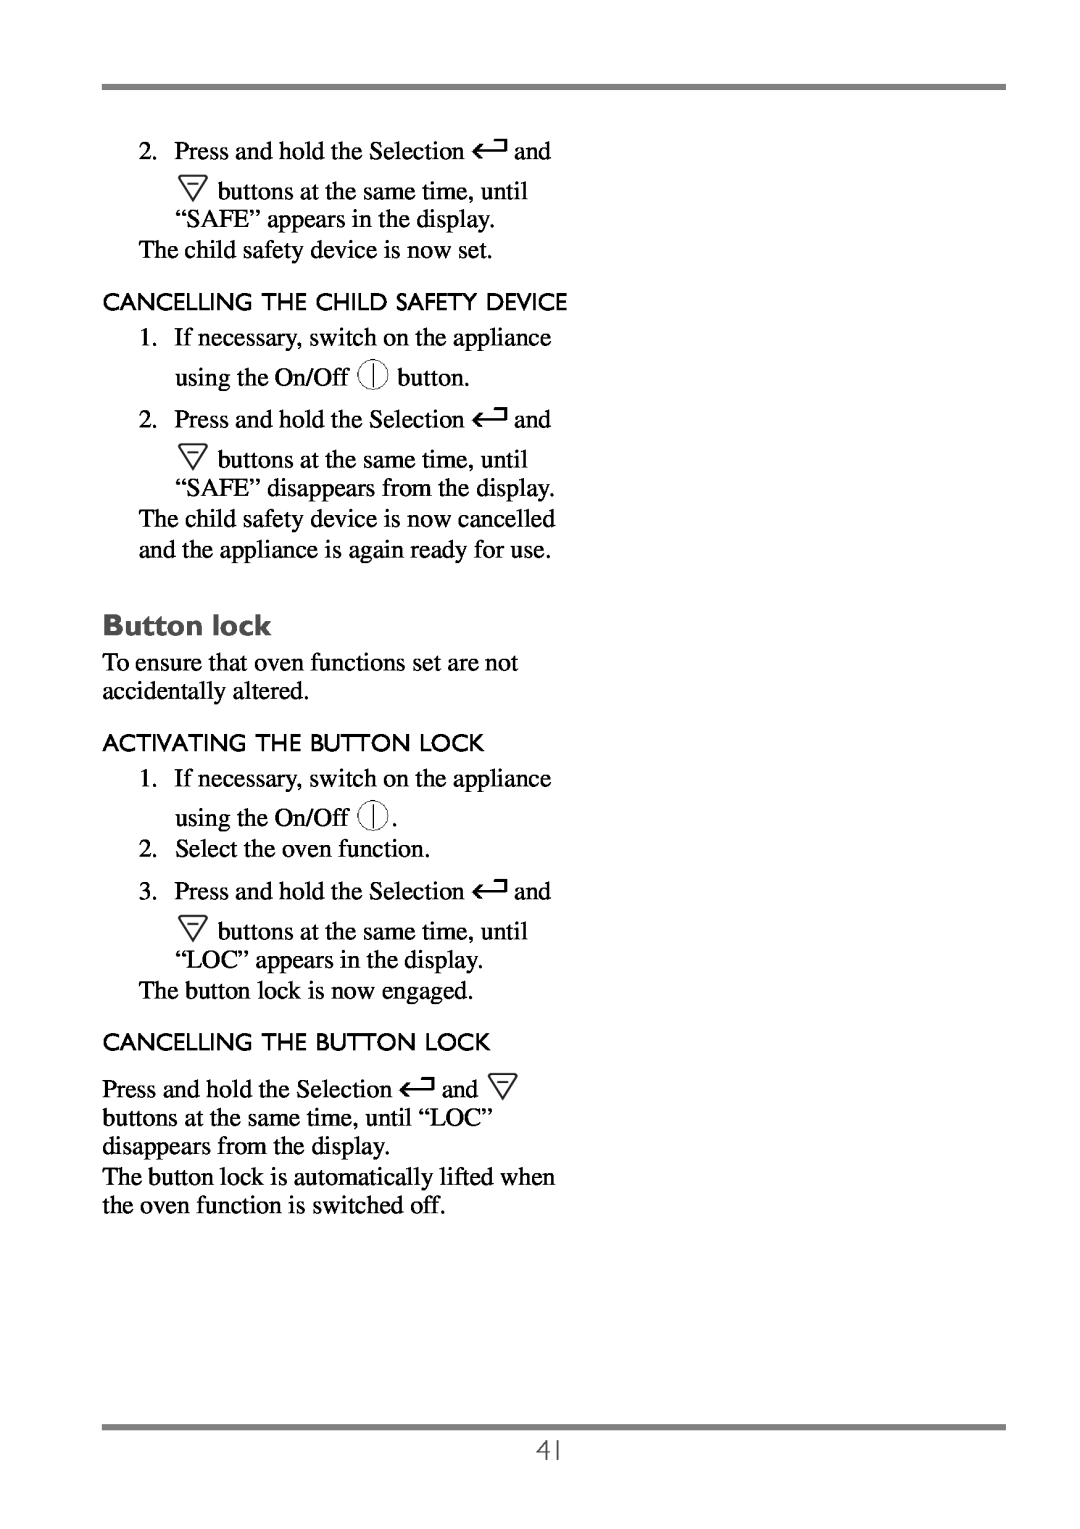 Electrolux EKC60752 user manual Button lock, Cancelling The Child Safety Device, Activating The Button Lock 